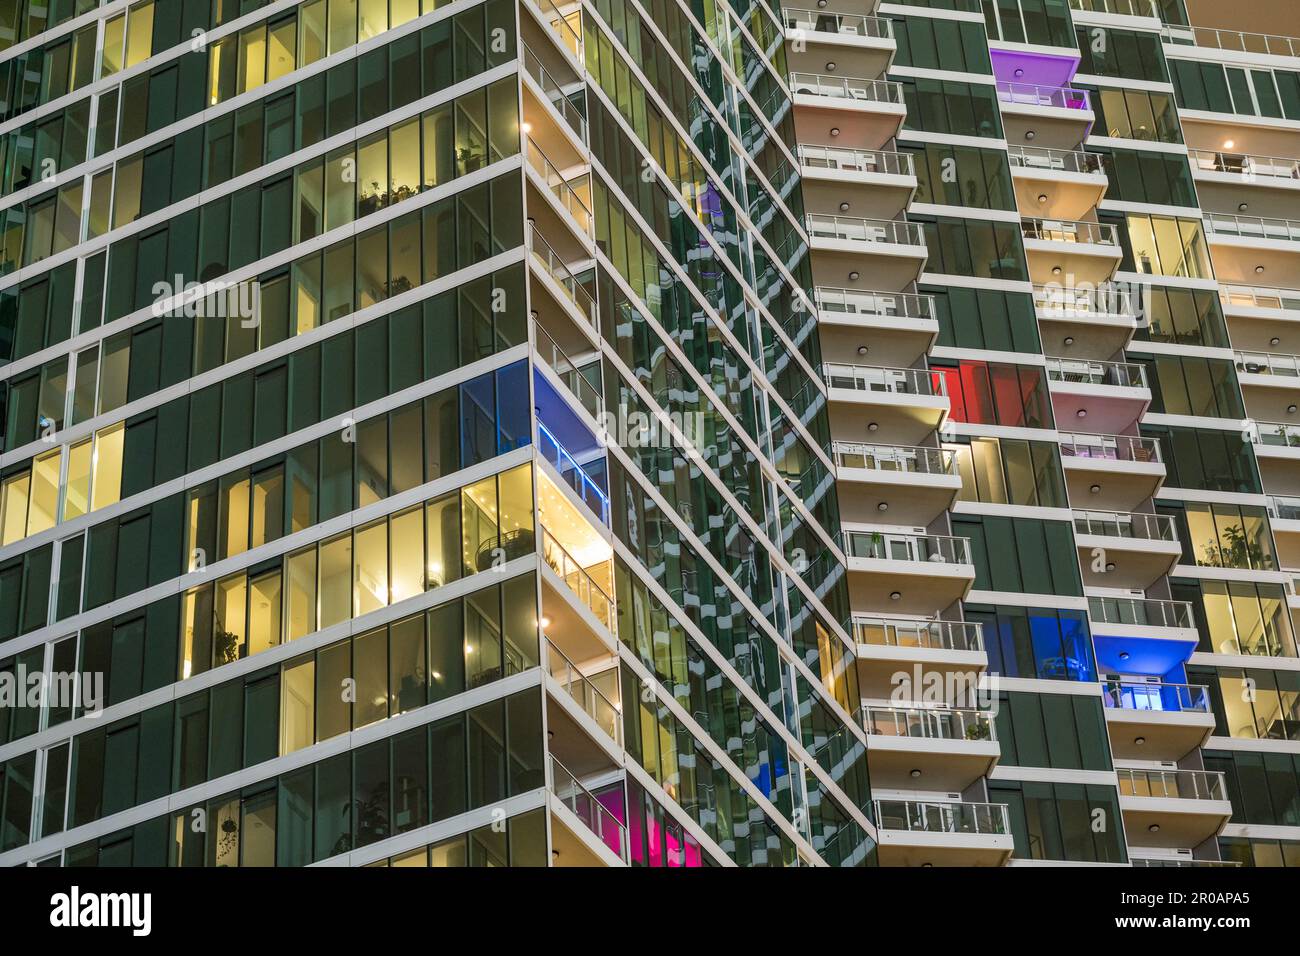 Facade of a high-rise apartment building at night Stock Photo